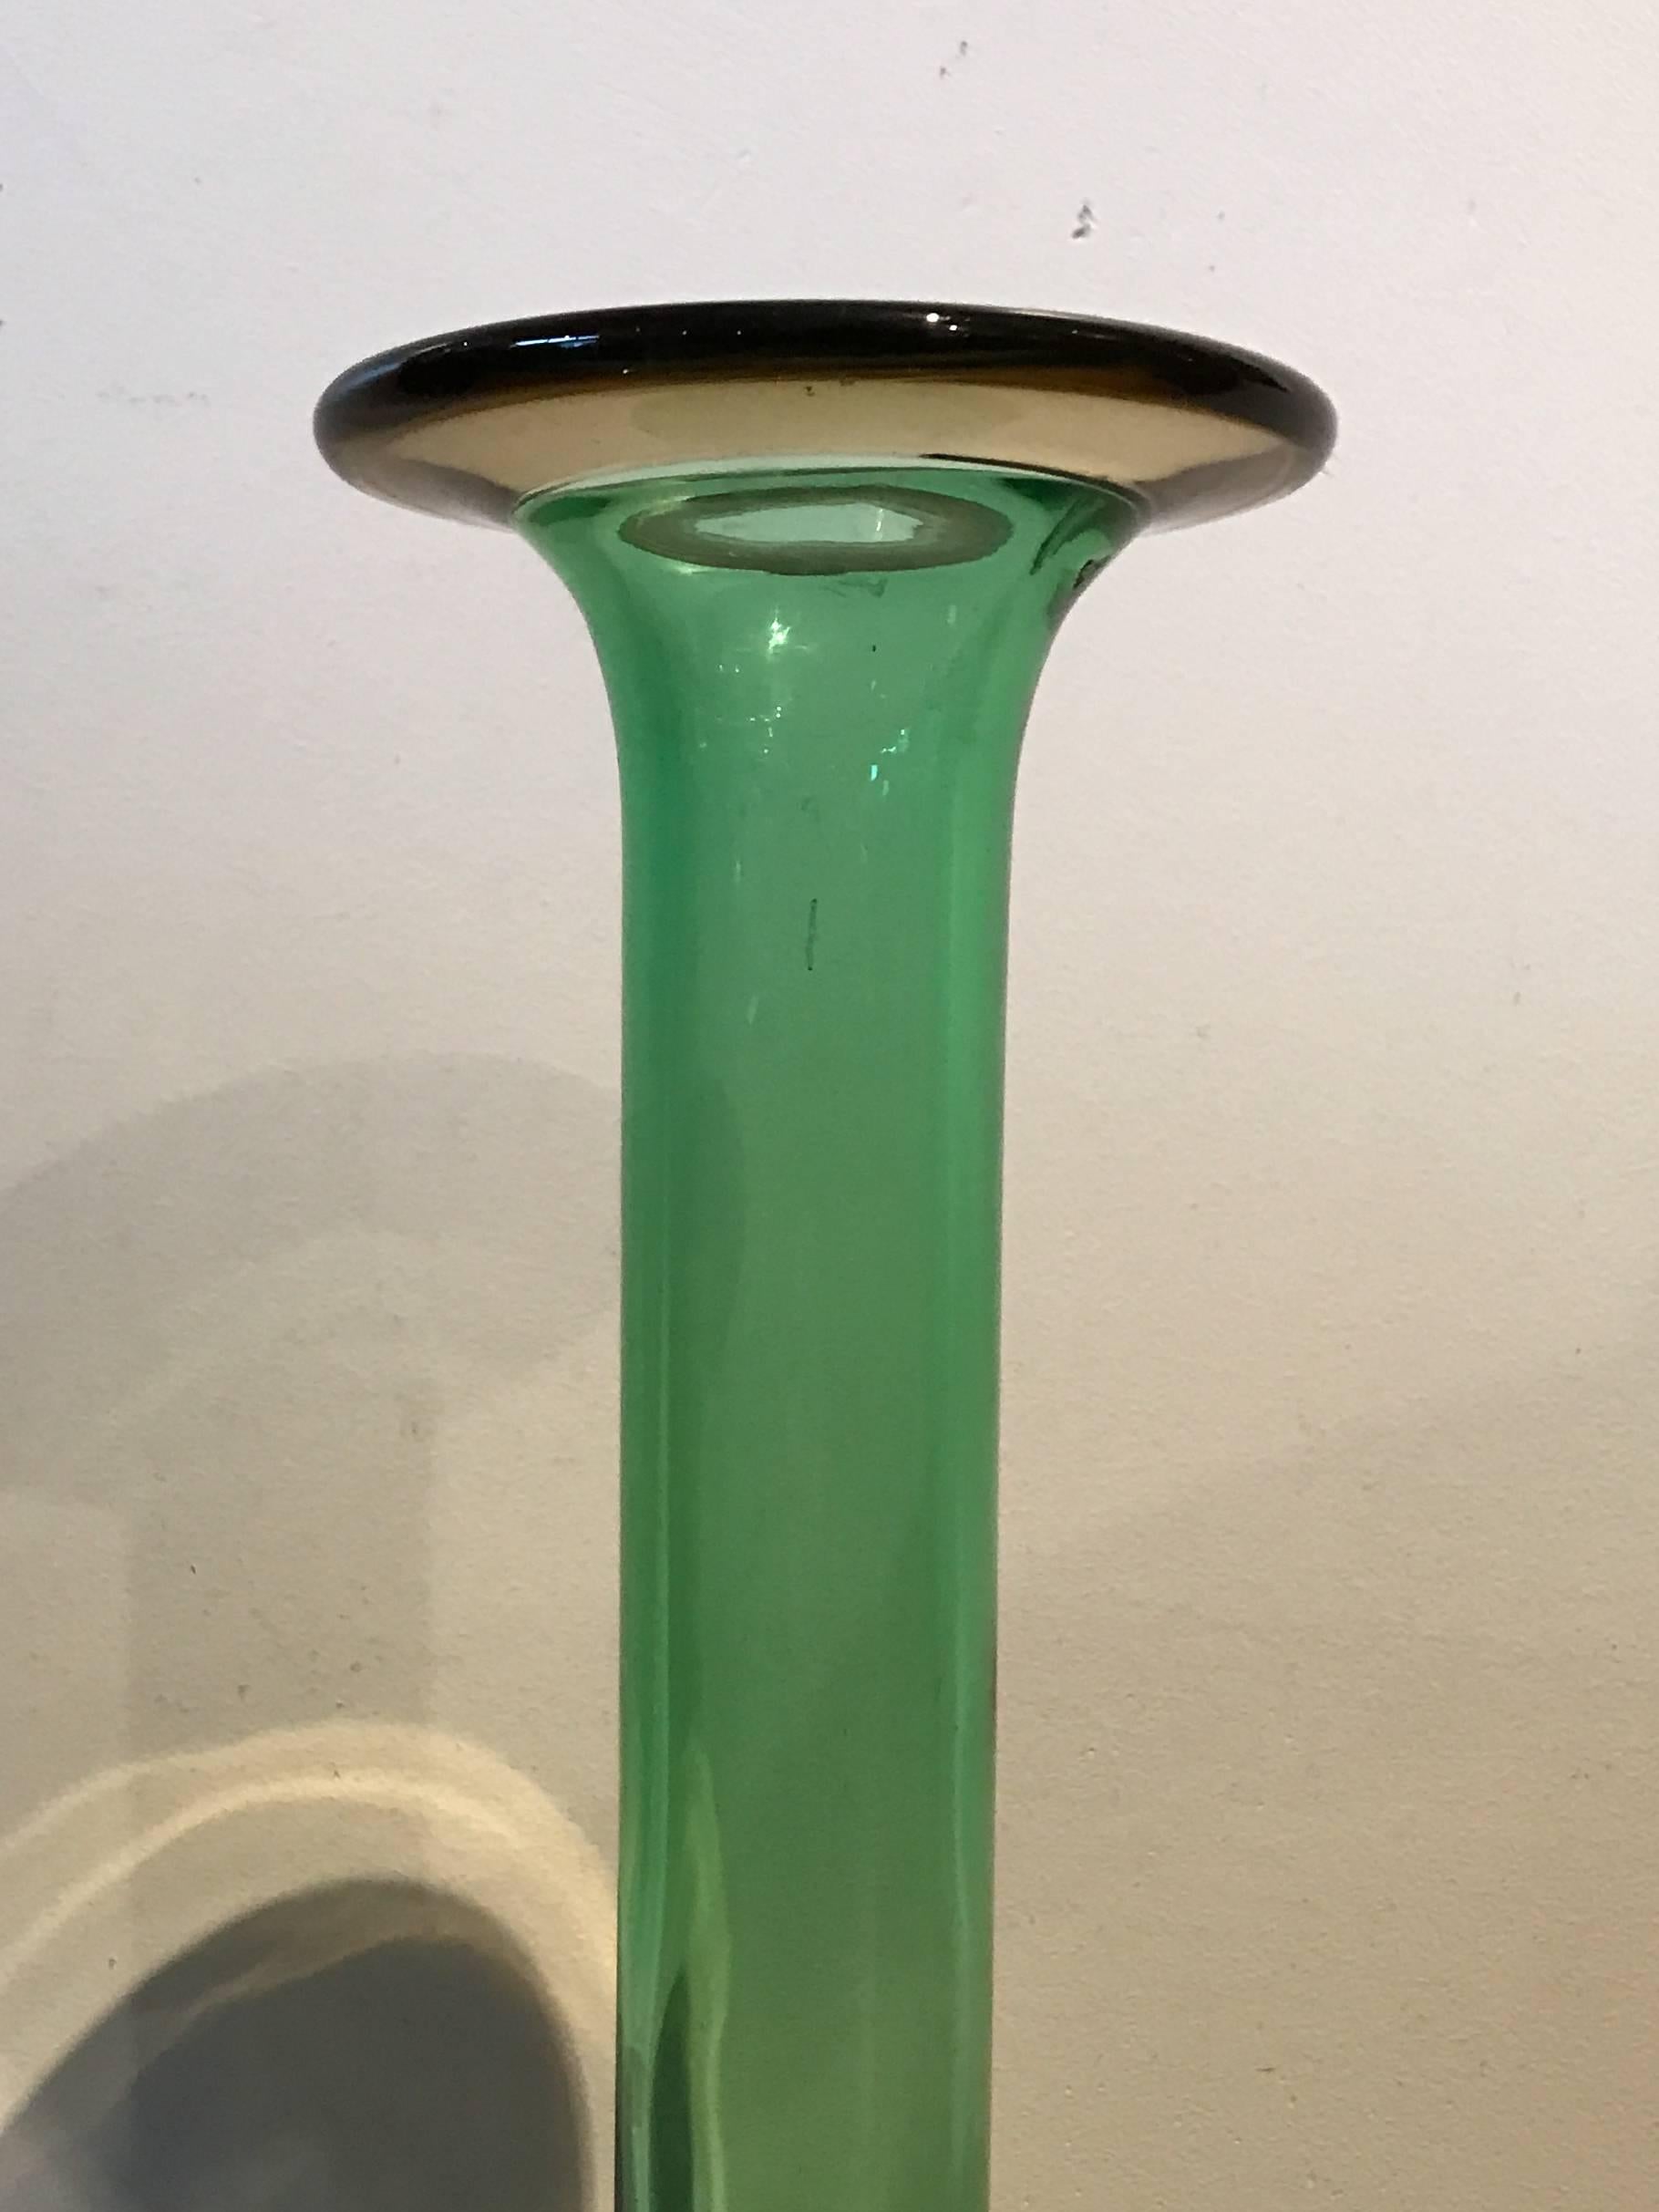 Green glass bottle vase attributed to Kastrup Holmegaard. Excellent condition, note the change from green glass to amber glass at the lip, a sign of quality glass blowing.